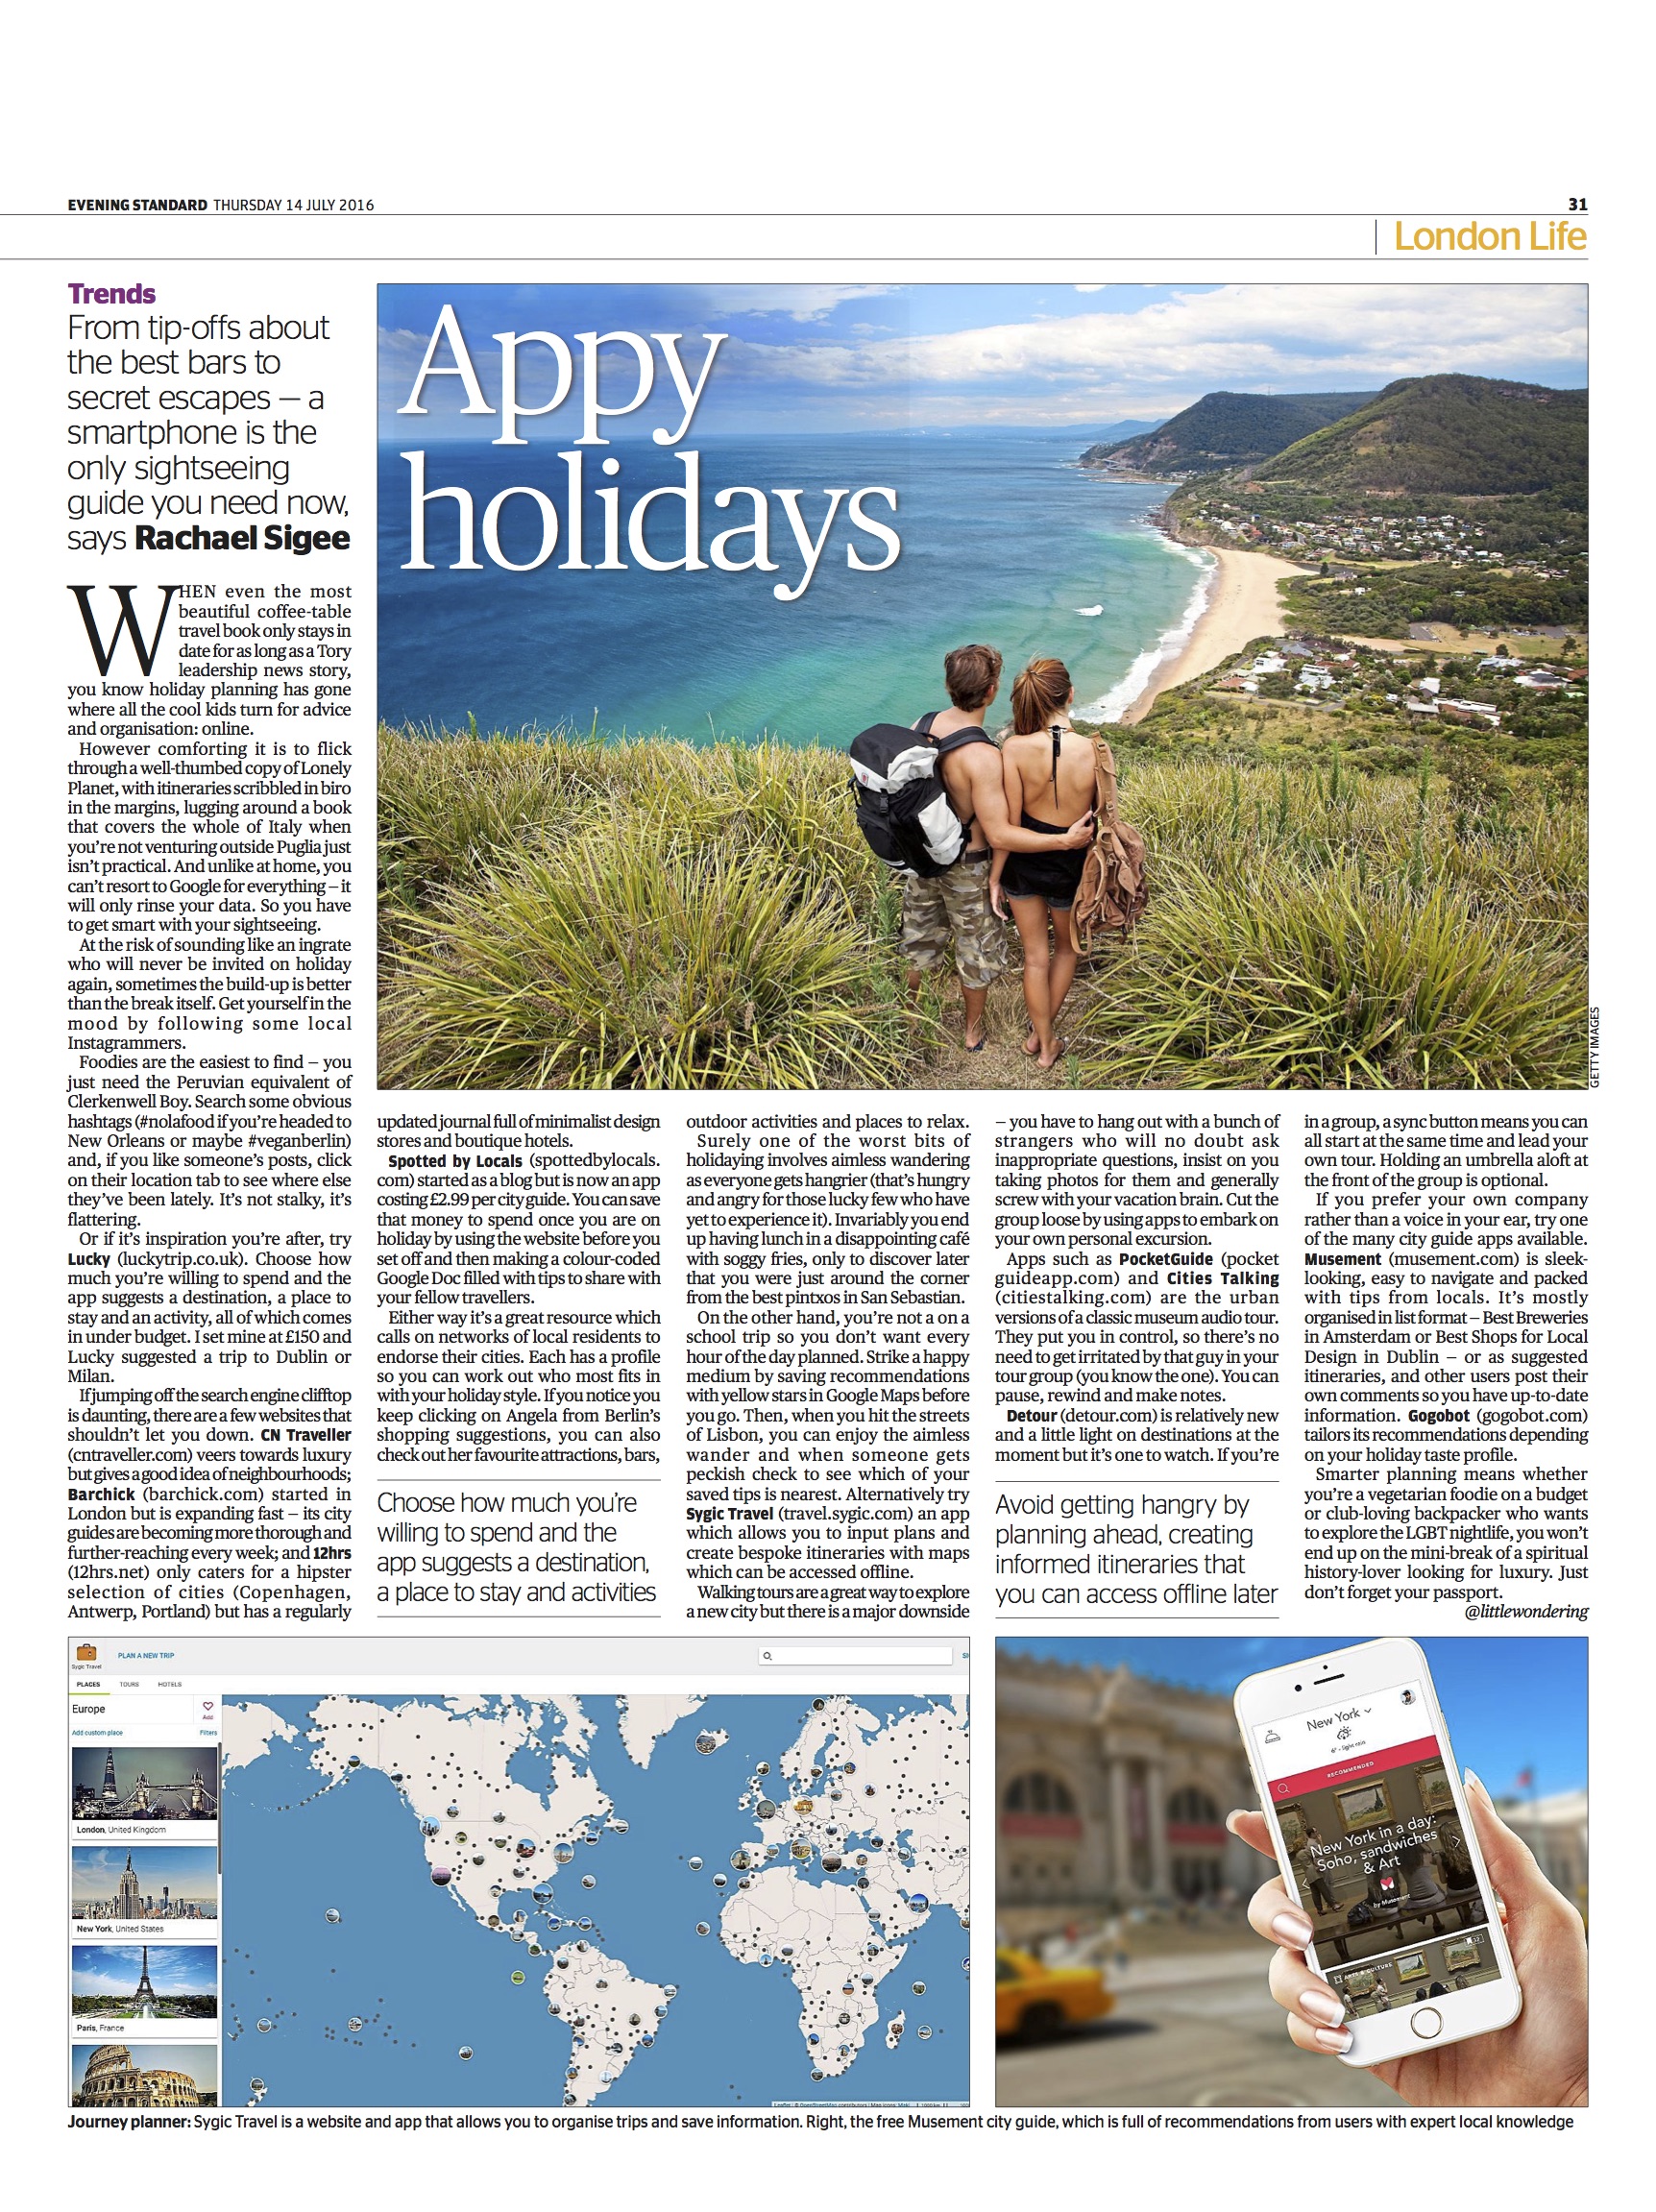 Feature on holiday and travel apps